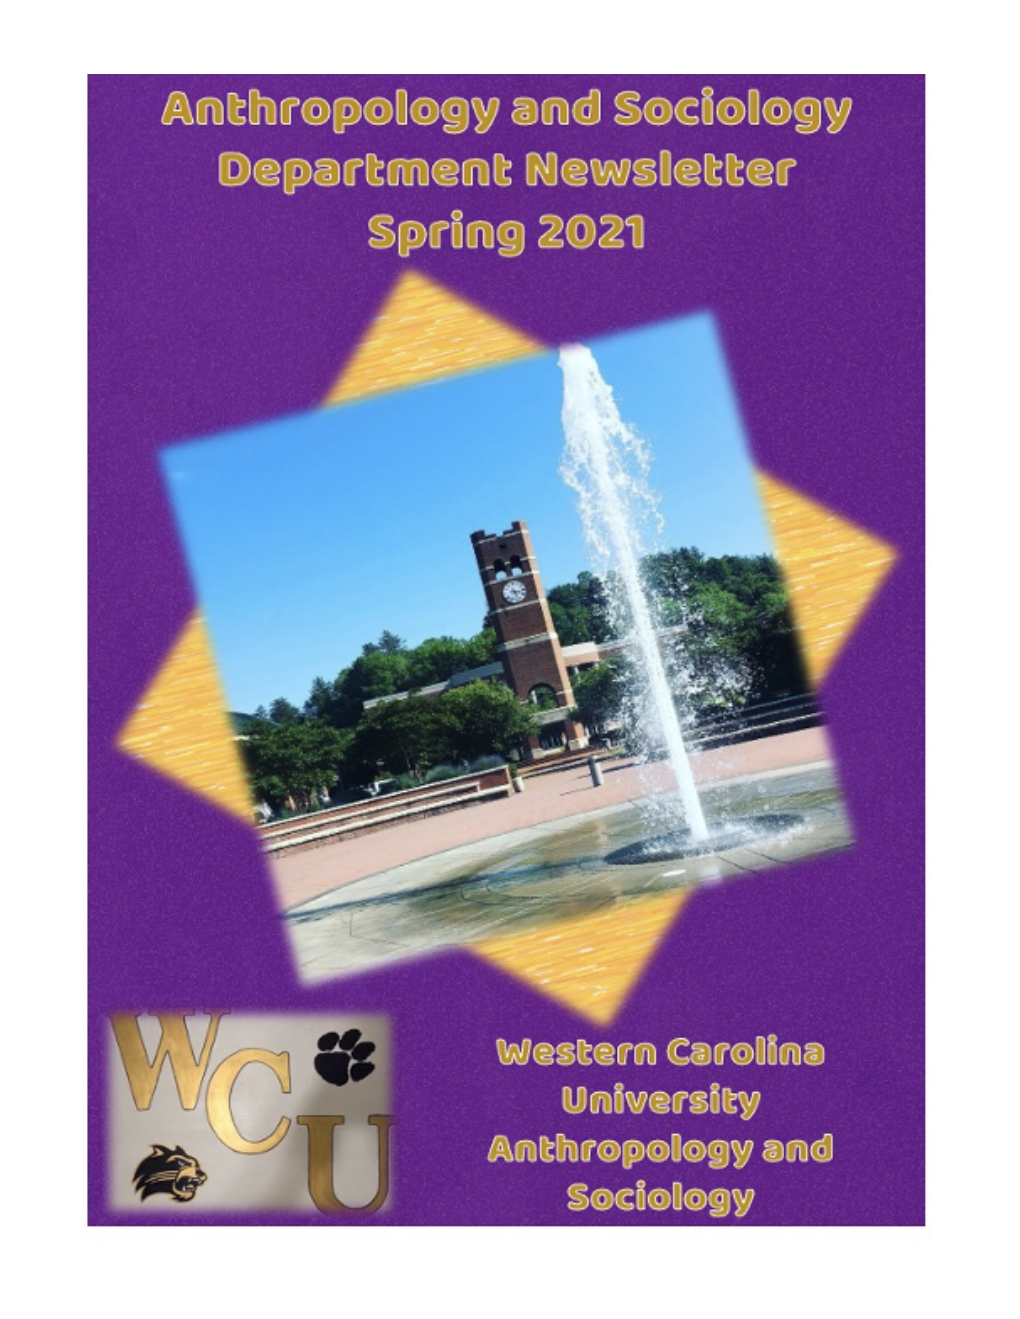 WCU's Anthropology and Sociology Department 2020-2021 Newsletter